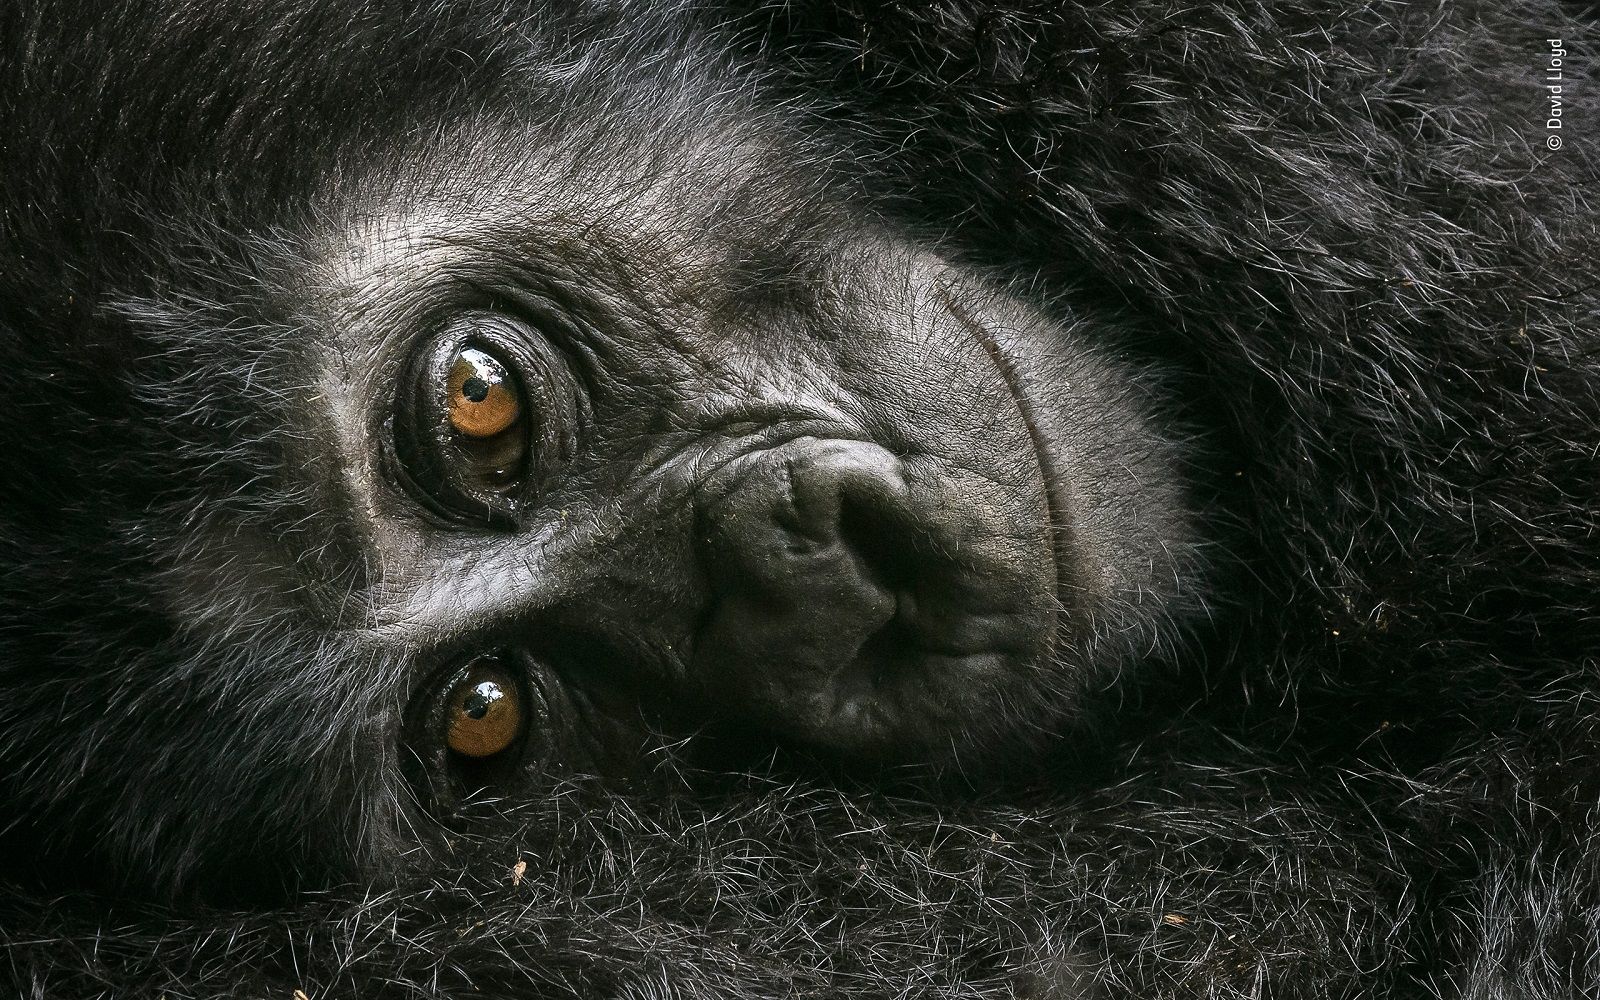 Incredible Images From The Wildlife Photographer Of The Year Competition image 14